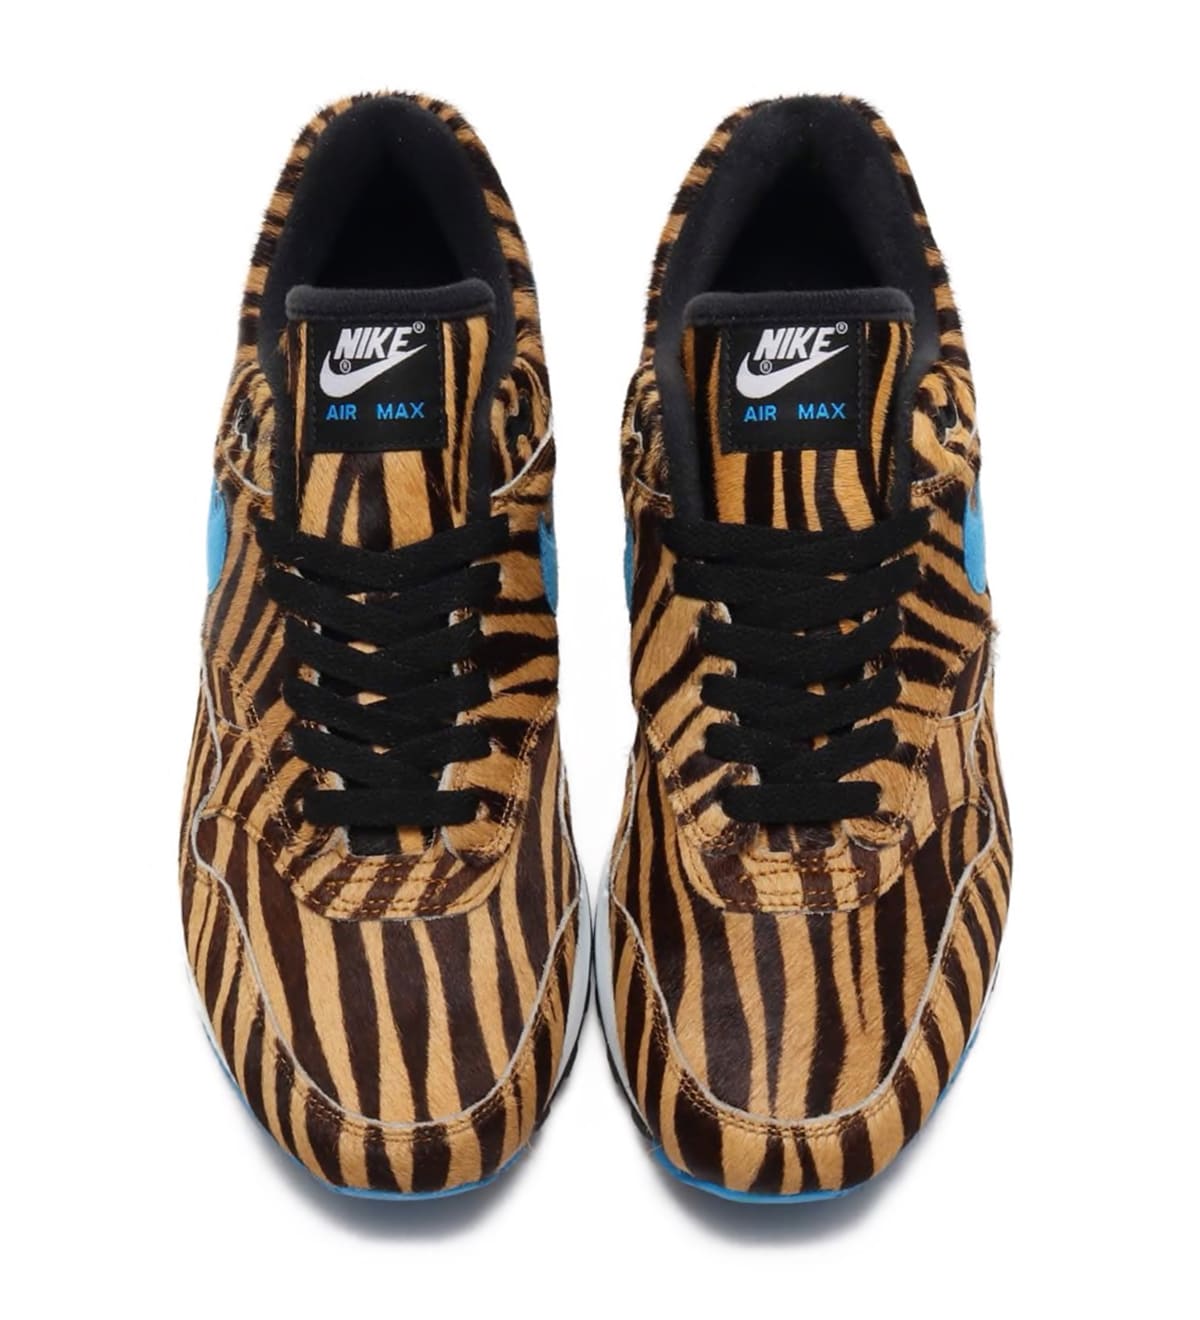 Detailed Looks at the atmos x Nike Air Max 1 Animal Pack 3.0